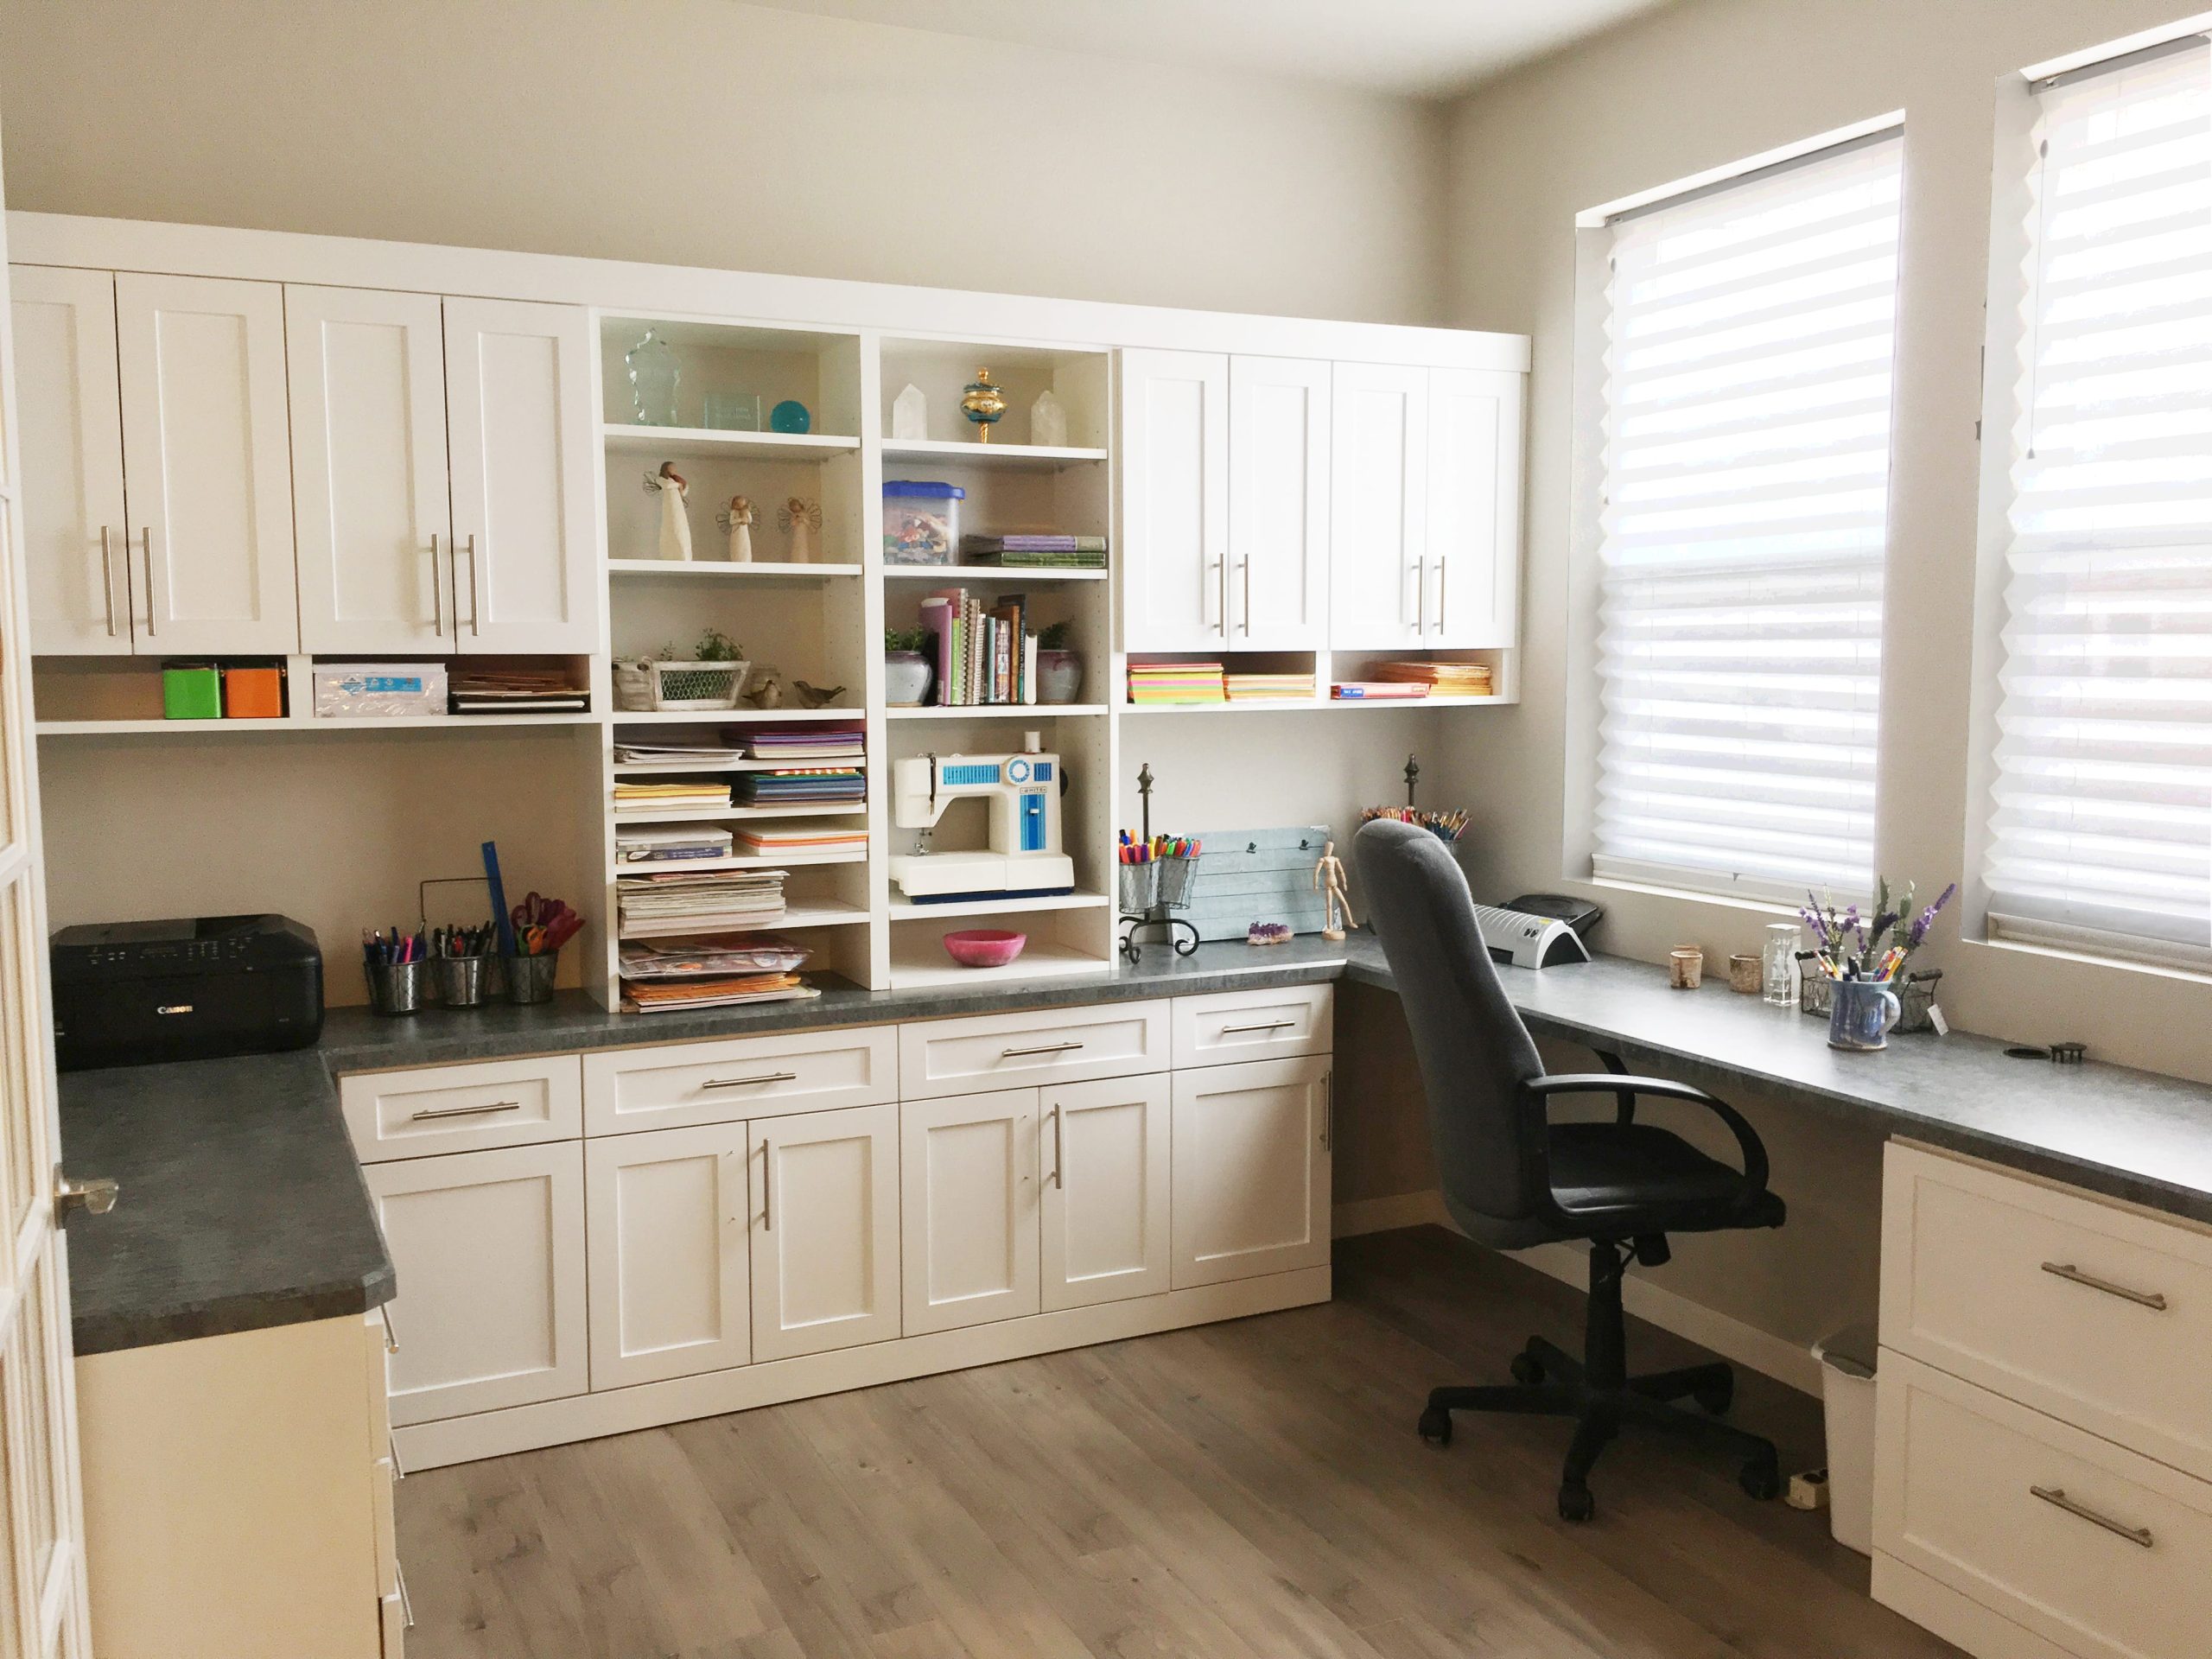 Craft Room & Office With a Murphy Bed - Salvaged Living